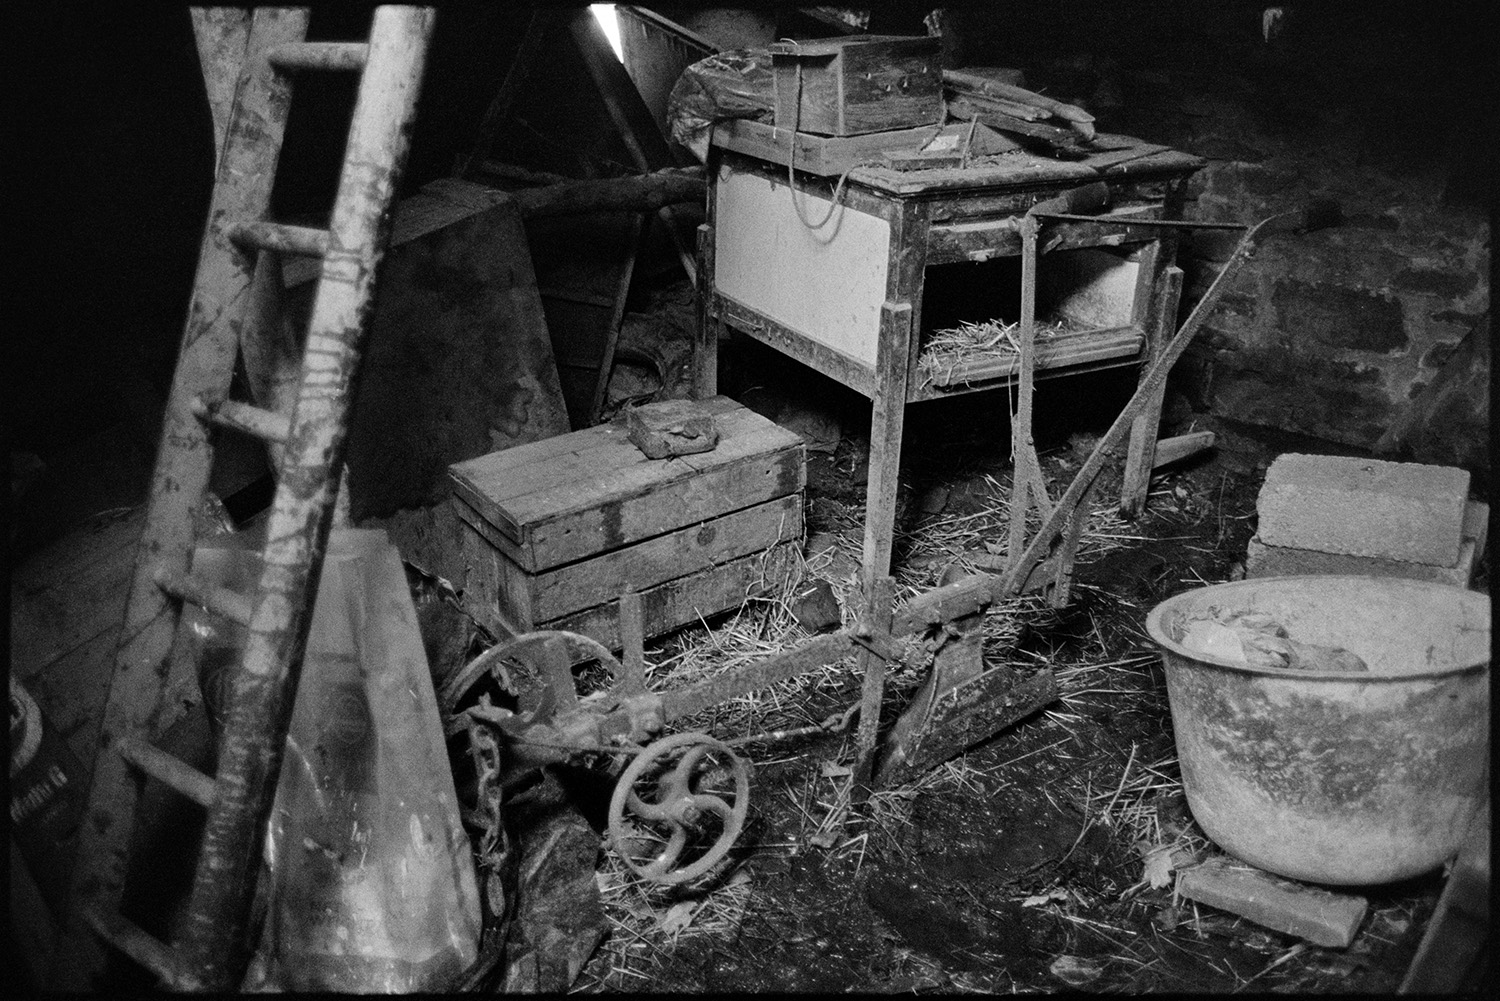 Tools and bits and pieces in shed, box contained ferret! 
[Archie Parkhouse's shed at Millhams, Dolton. A ladder, bowls, block, parts of machinery or tools can be seen. The box on the floor contained a ferret.]